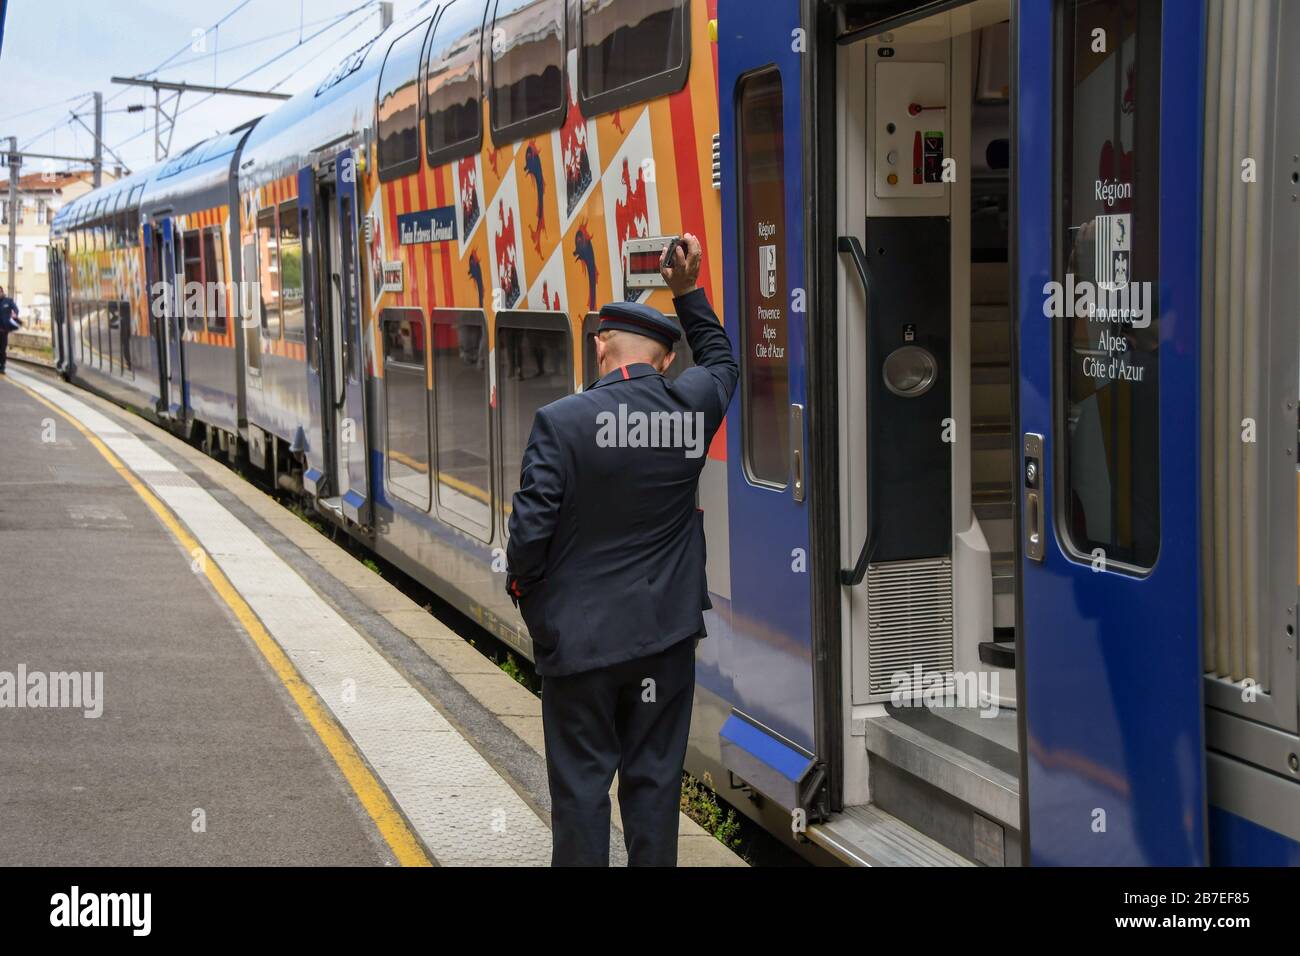 ST RAPHAEL, FRANCE - APRIL 2019: Rail guard signalling to the driver the train is ready for departure. Stock Photo